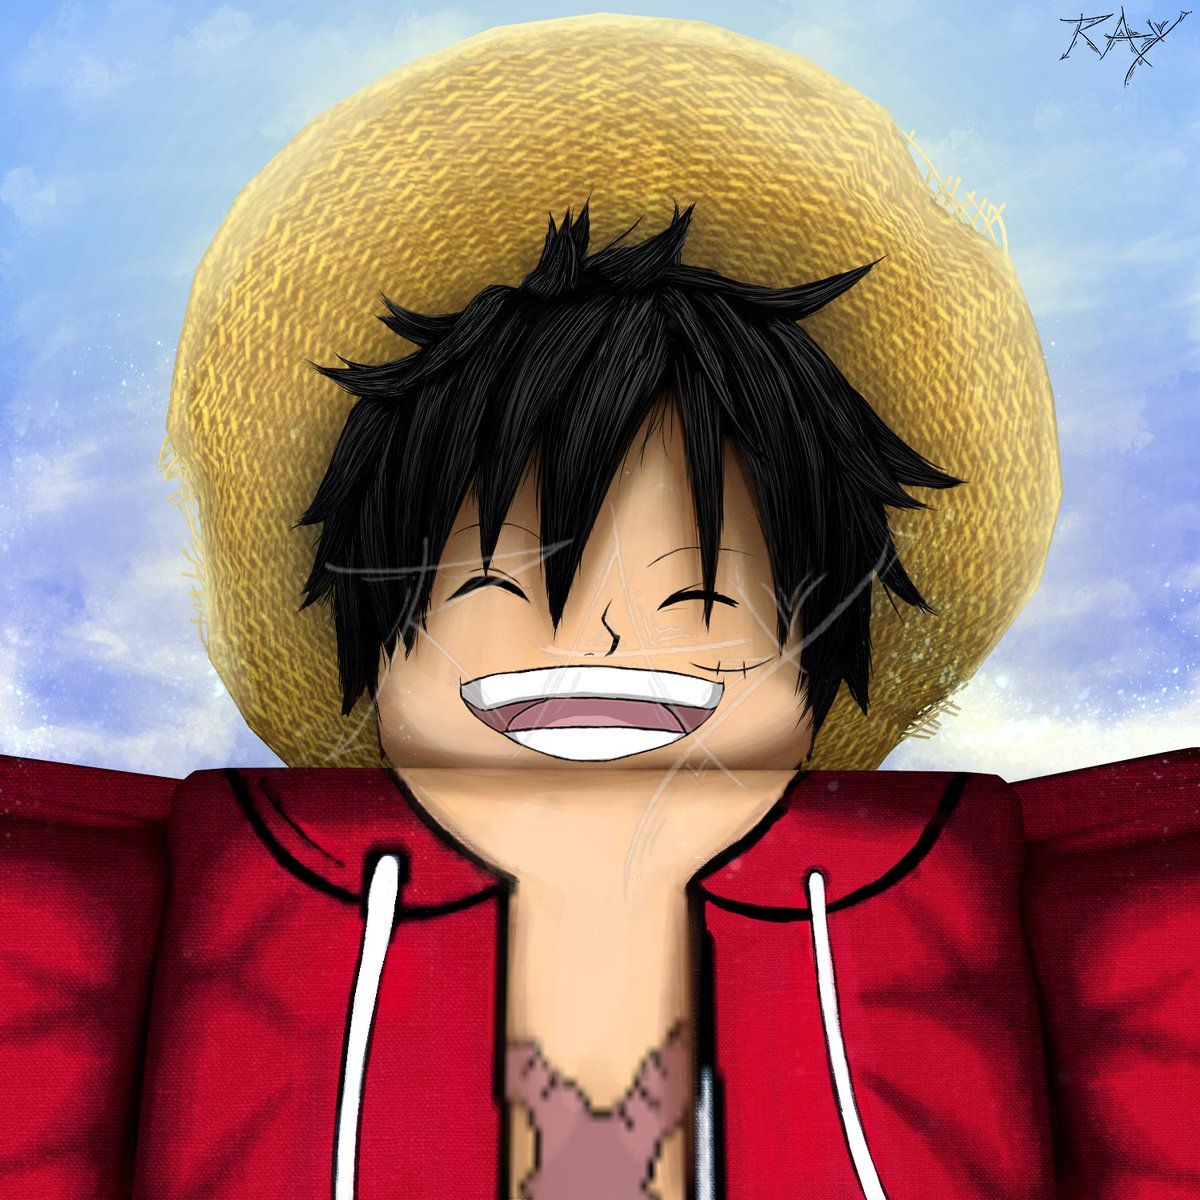 23t0x1n On Twitter Sort Of But Luffy Has A Low Face - roblox luffy face